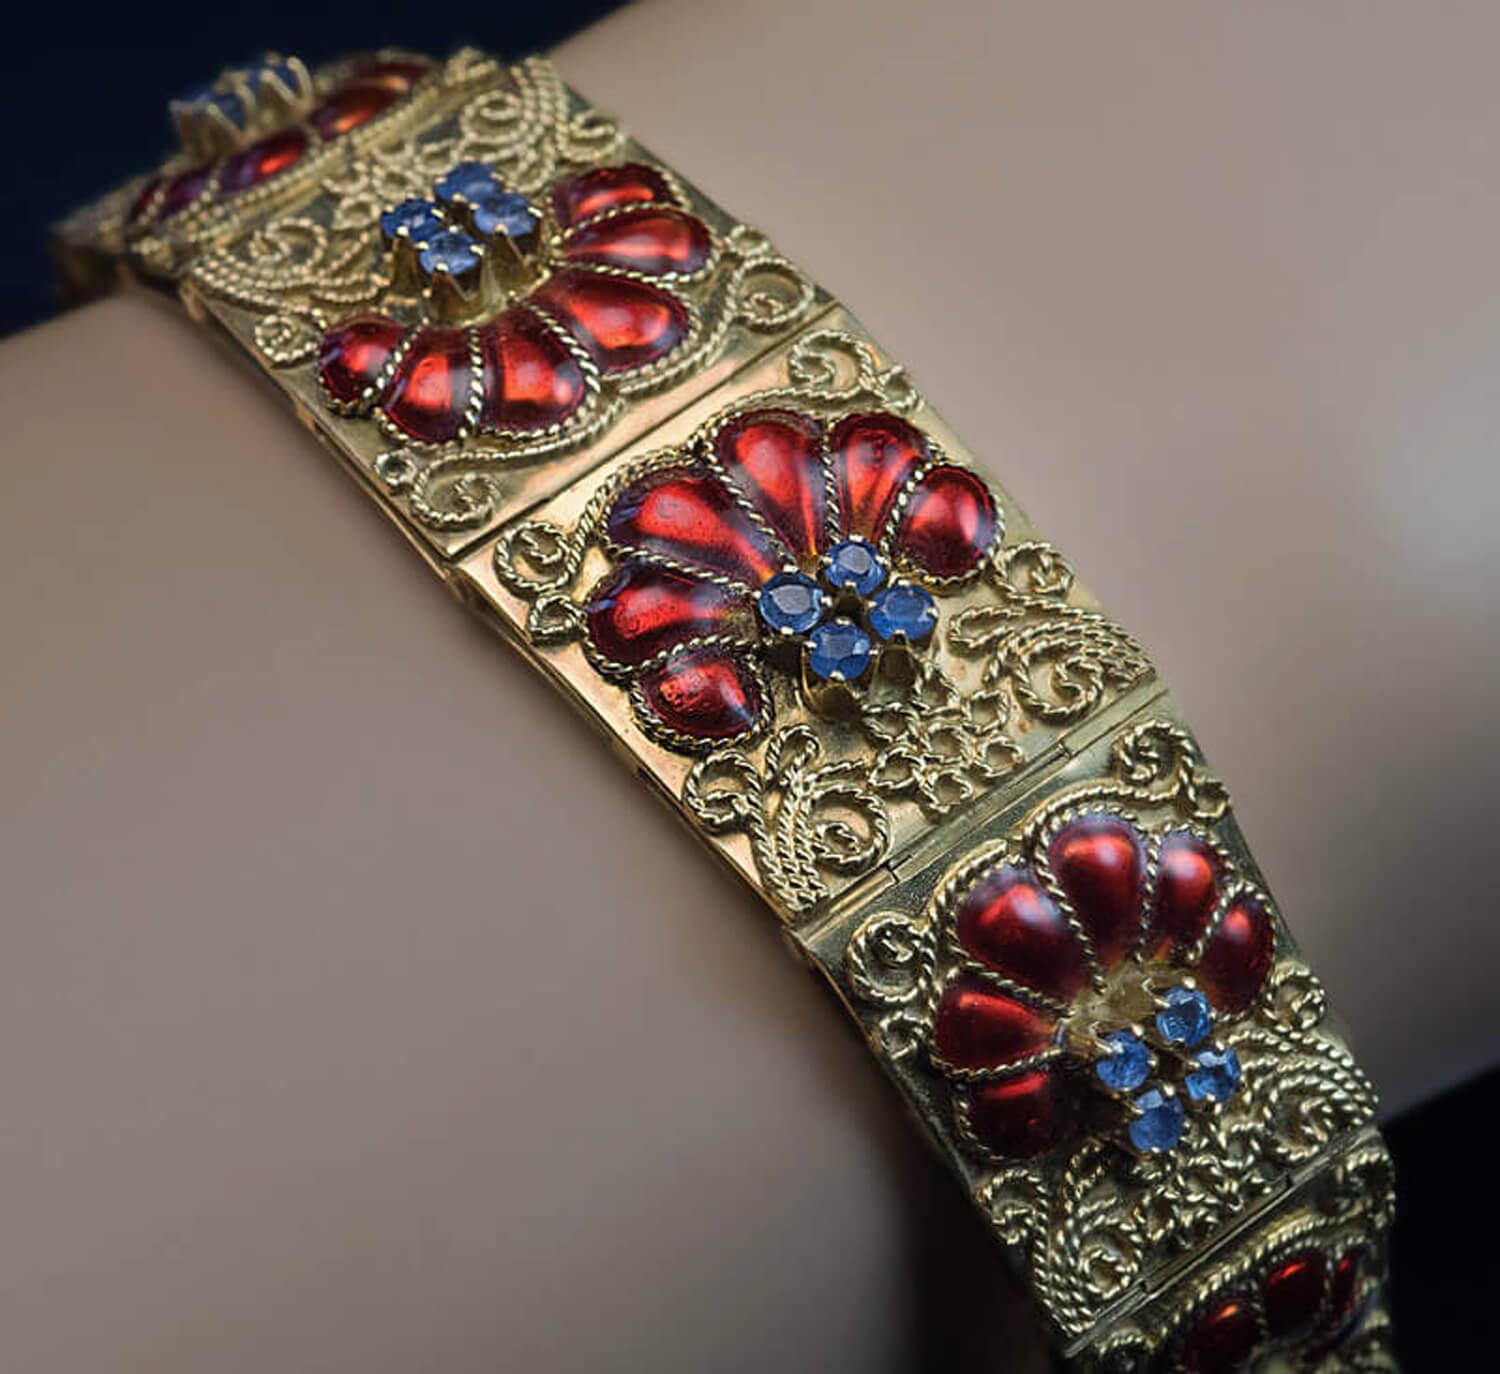 This spectacular 18K gold bracelet was handcrafted in Italy in the 1950s.  The bracelet is embellished with red enamel stylized shells, small blue sapphires and gold filigree.  Weight is 39.35 grams.  Width is 18 mm (11/16 in.)  Length is 188 mm (7